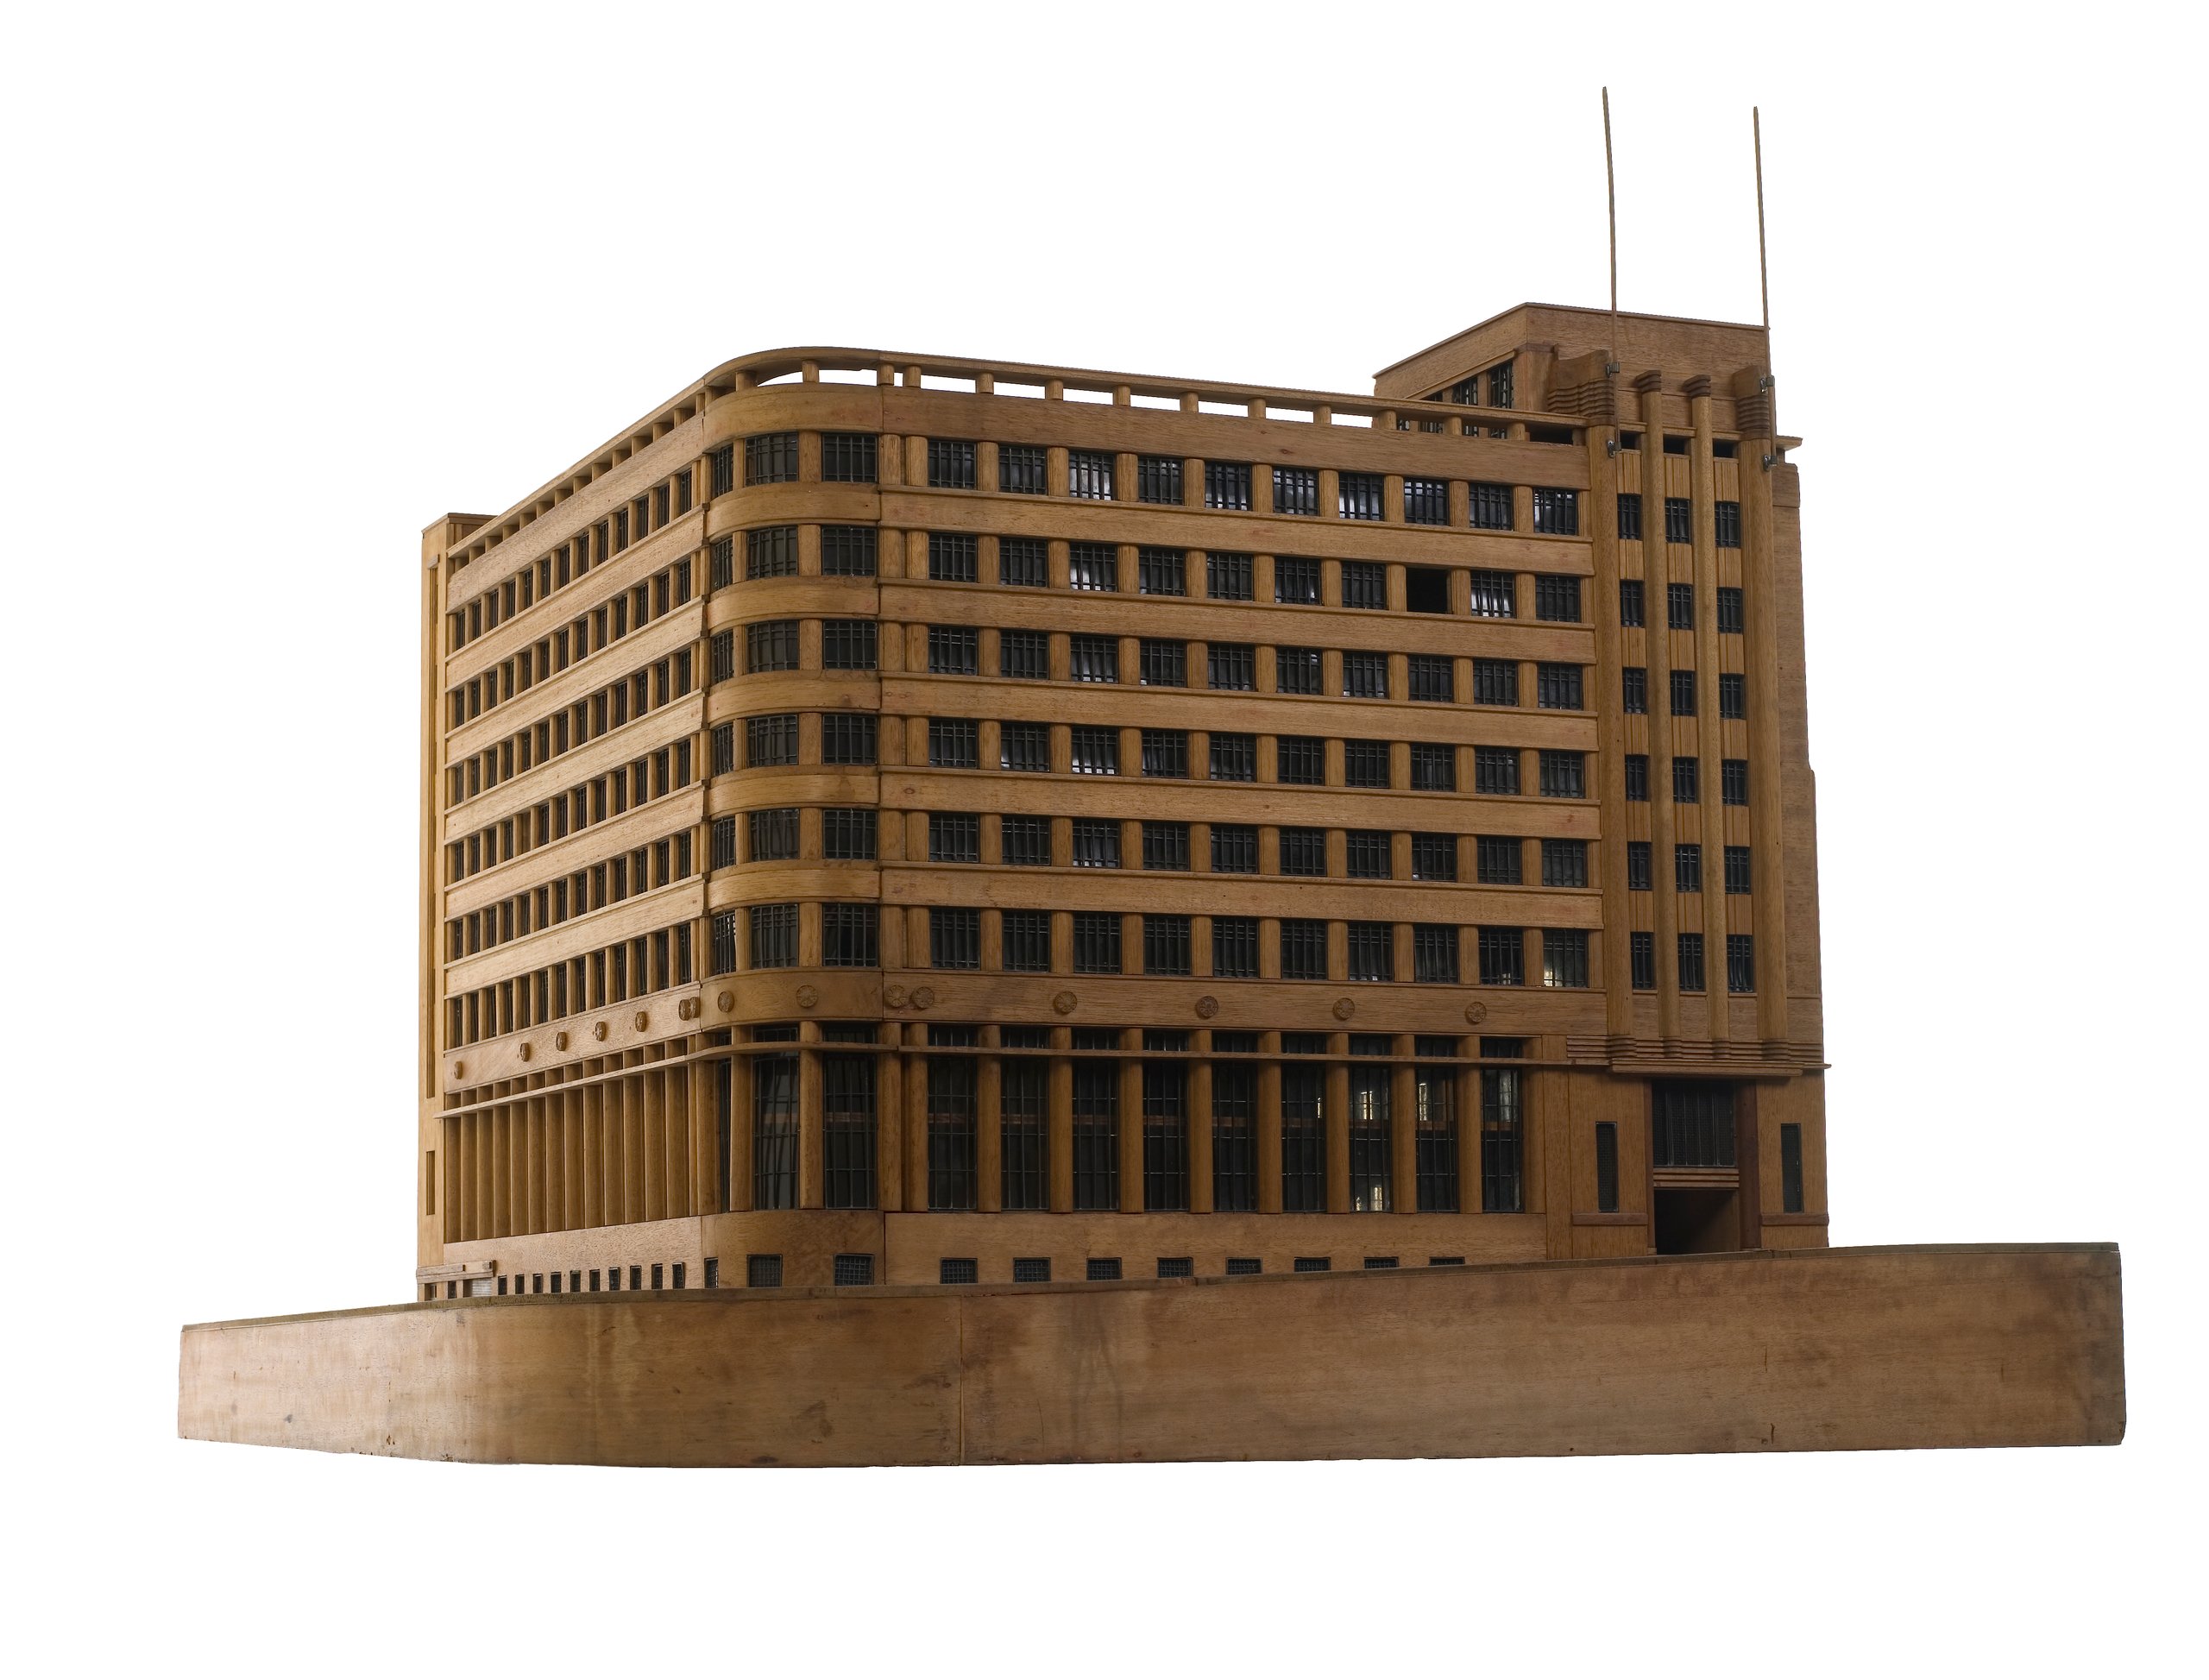 Model of the Metropolitan Water Sewerage and Drainage Board Building